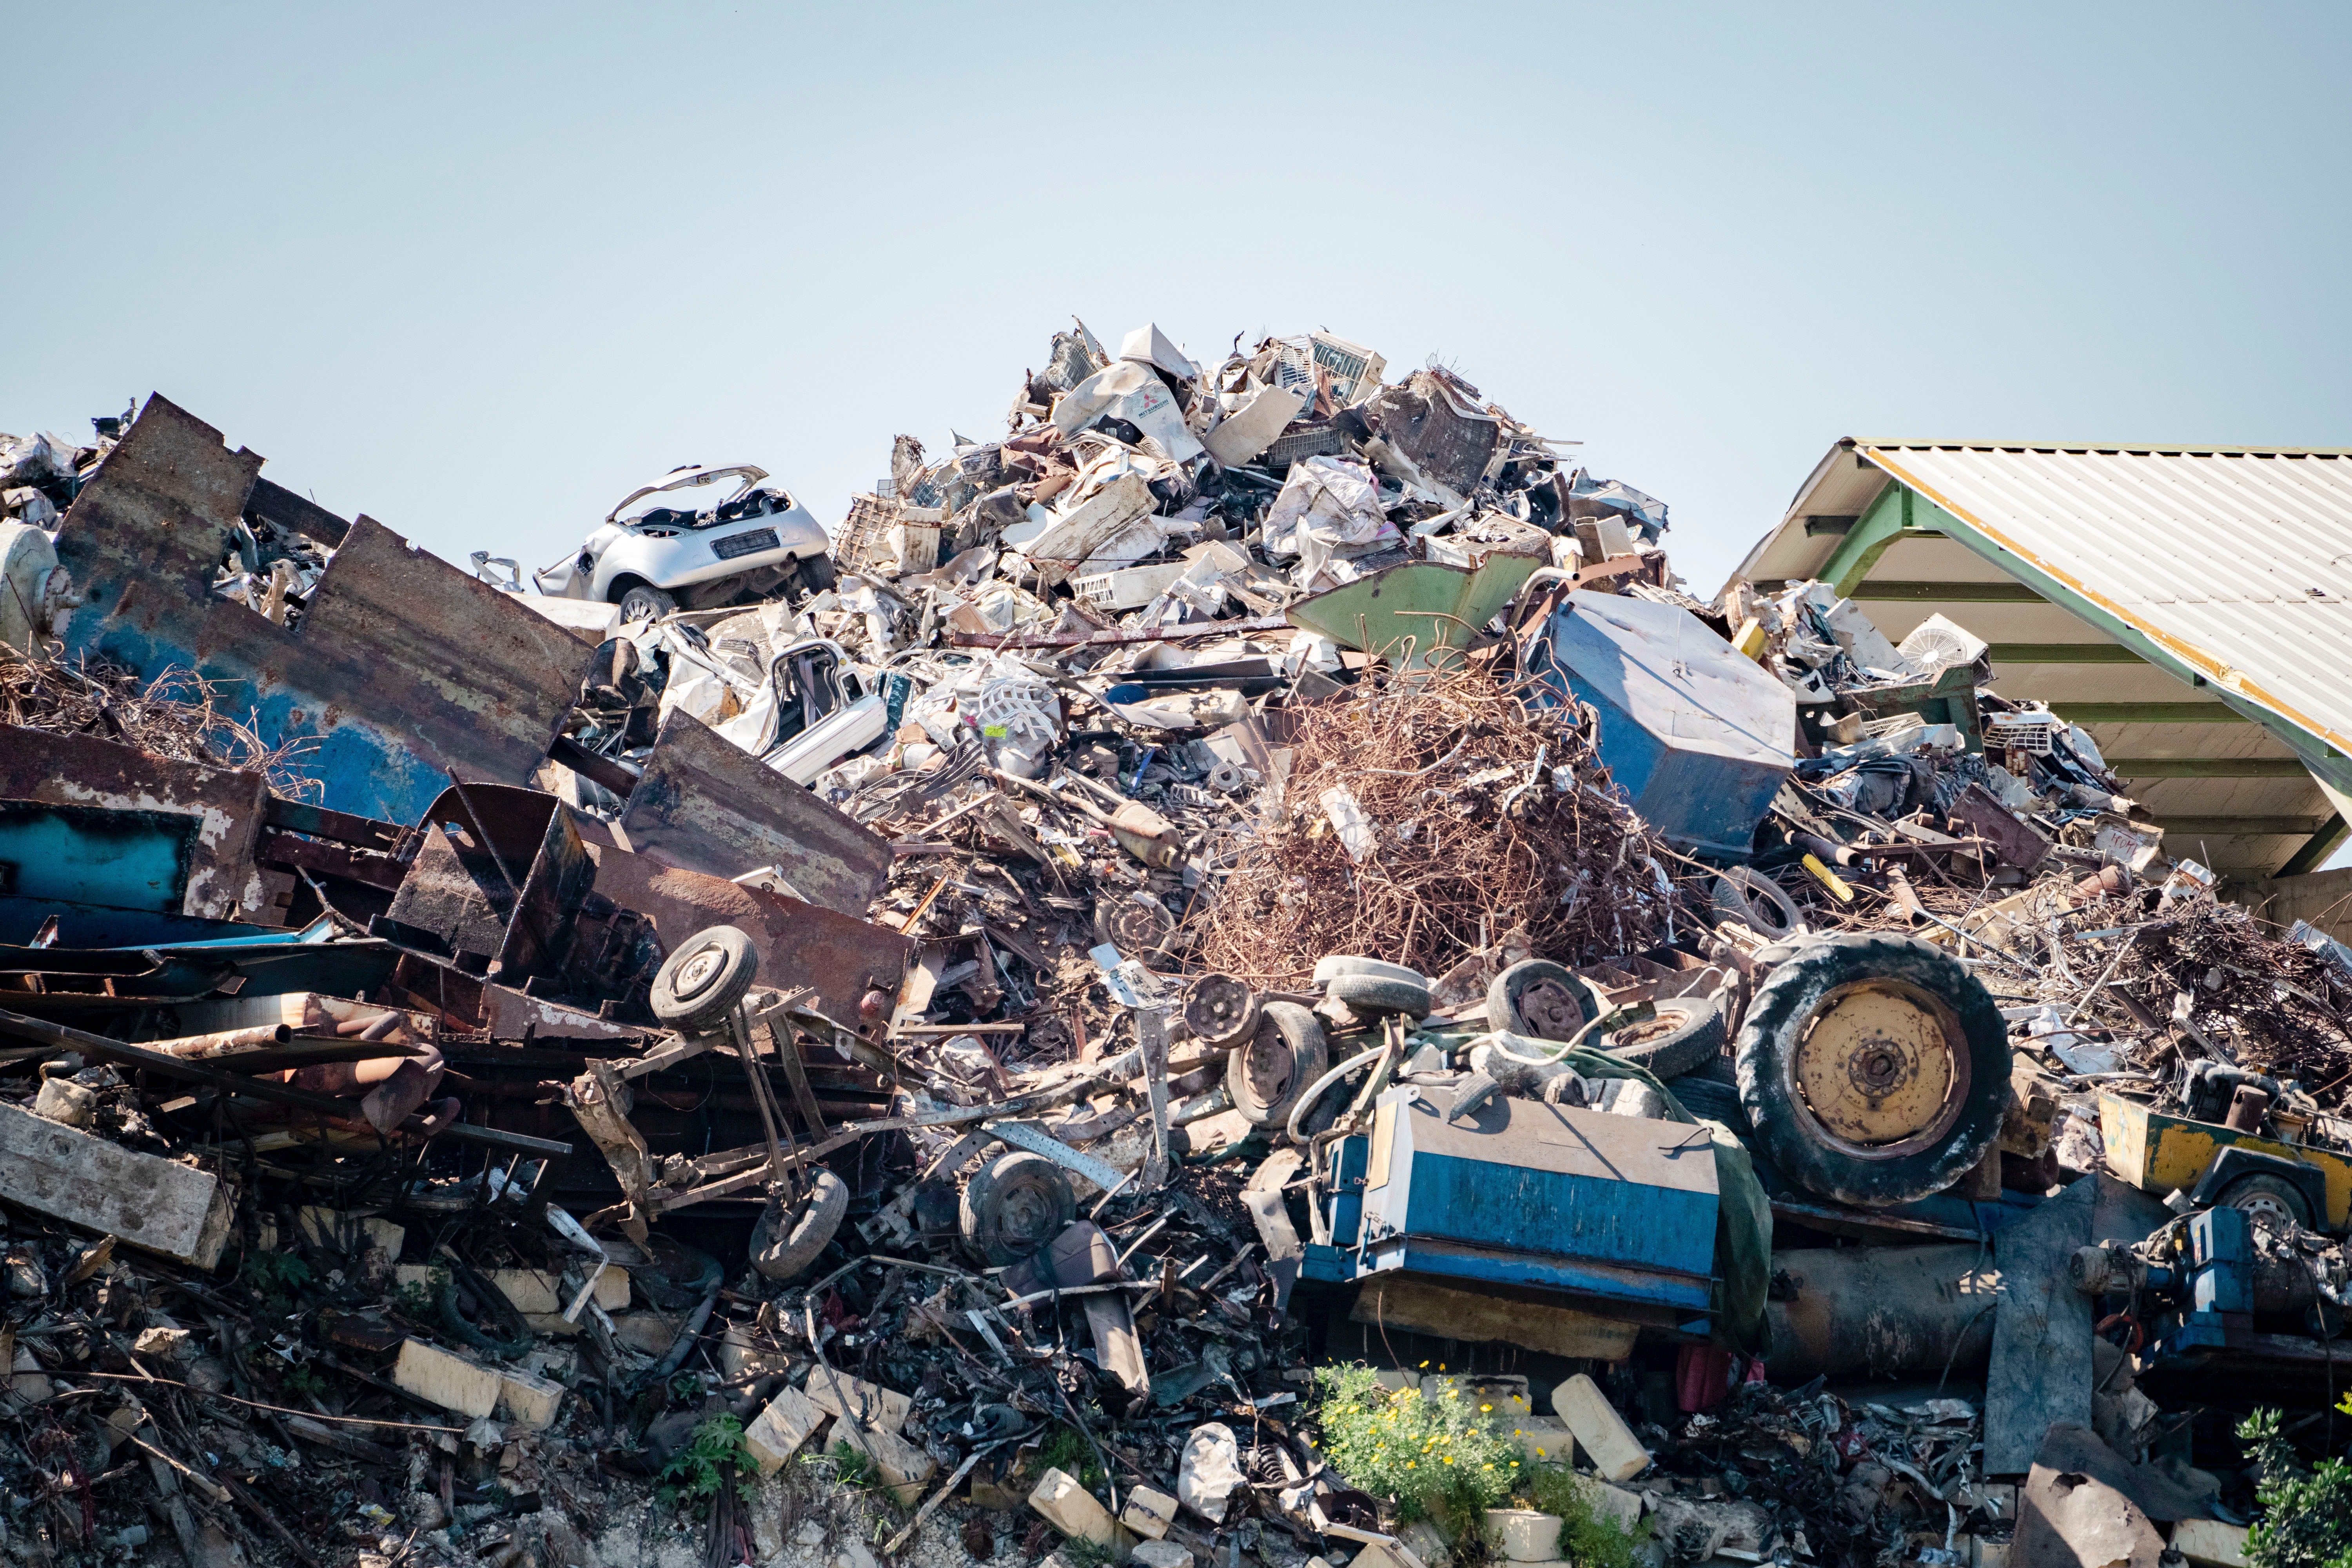 A garbage pile containing old cars and mechanical equipment.